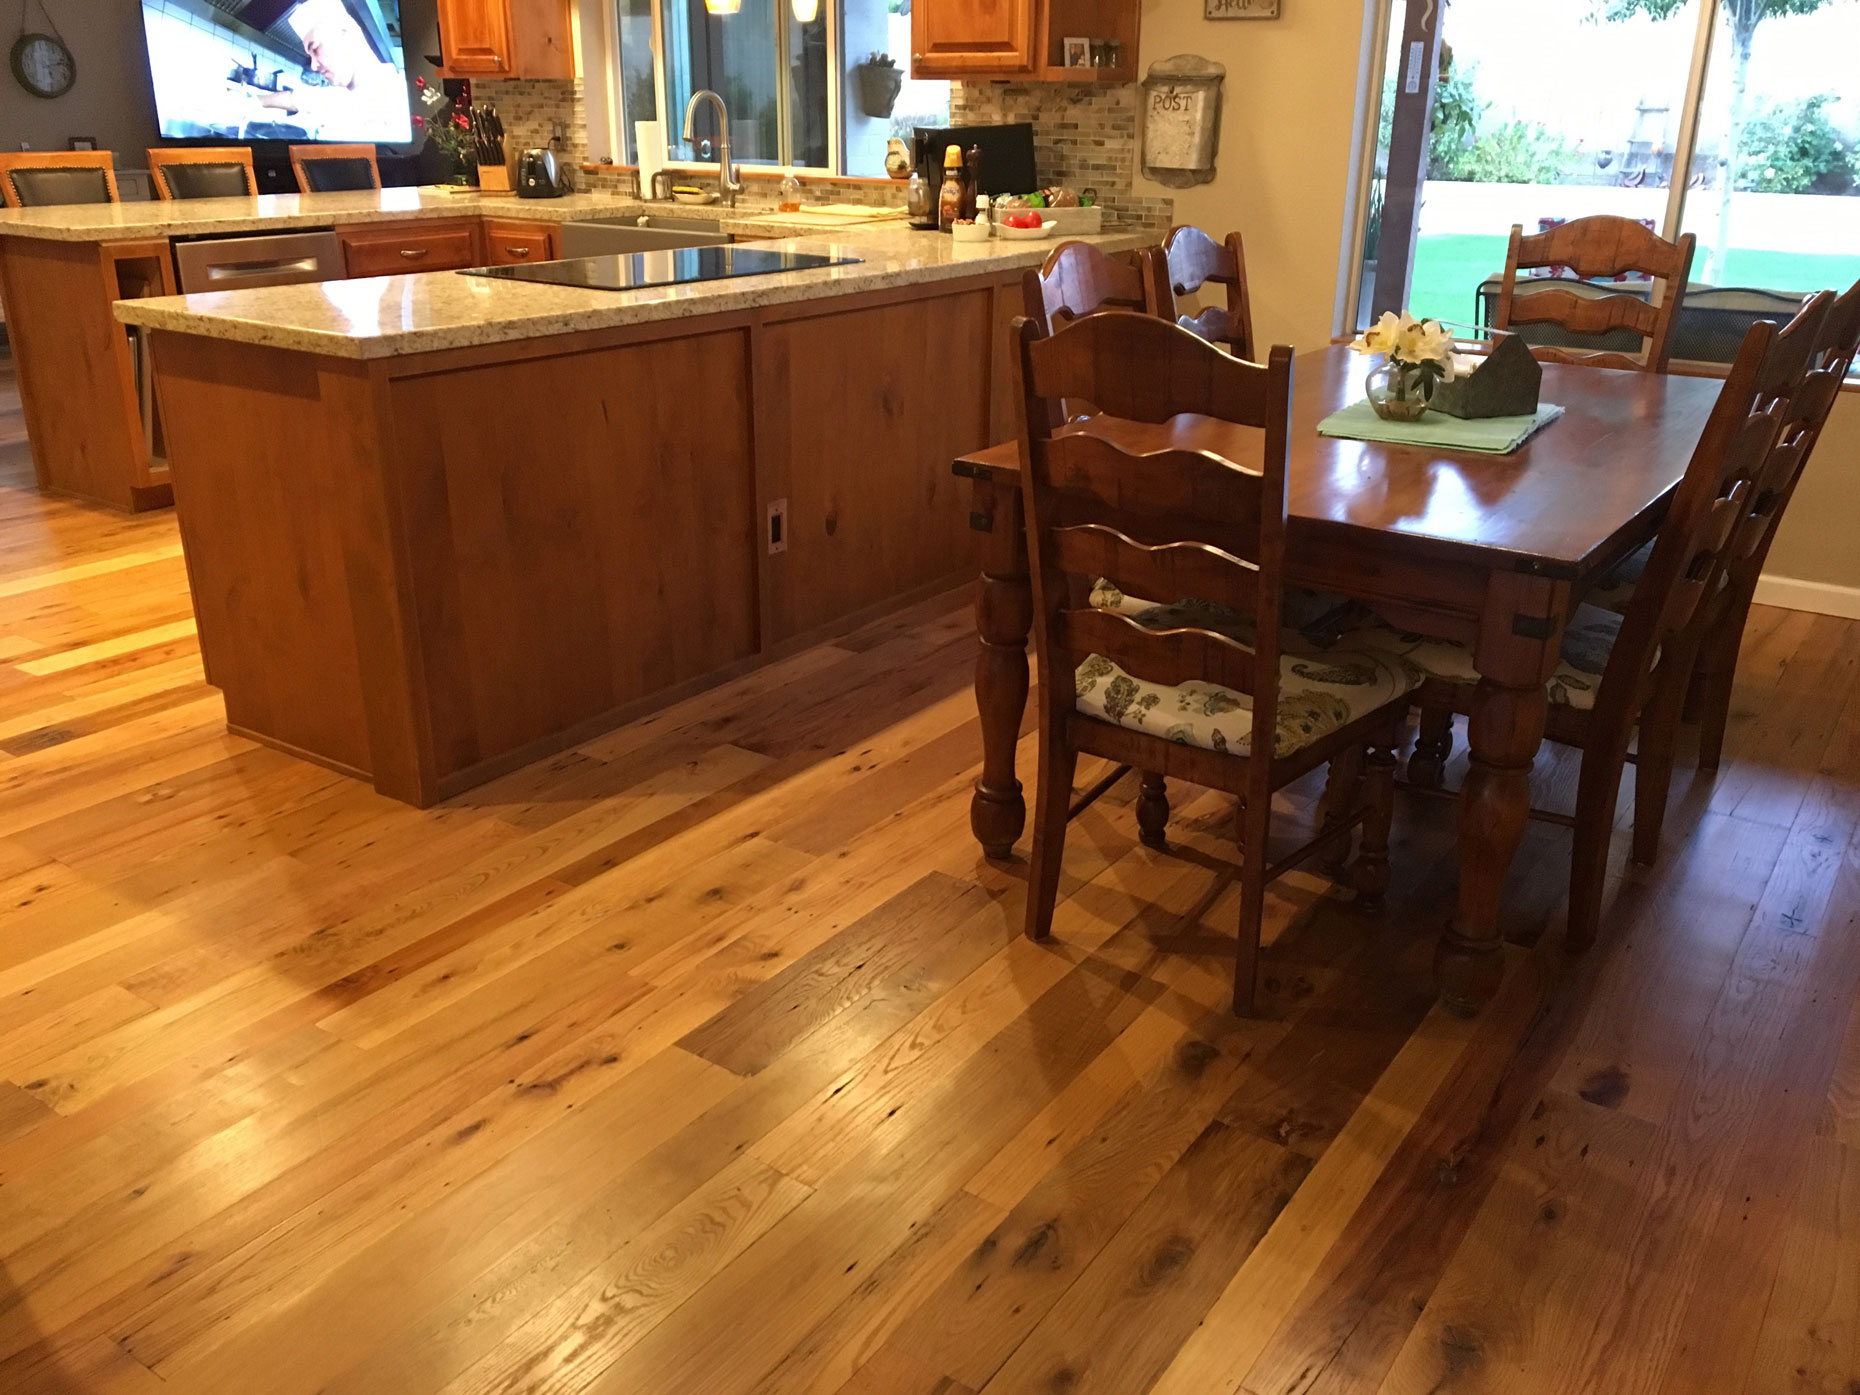 Reclaimed Cantilever wood flooring in the kitchen